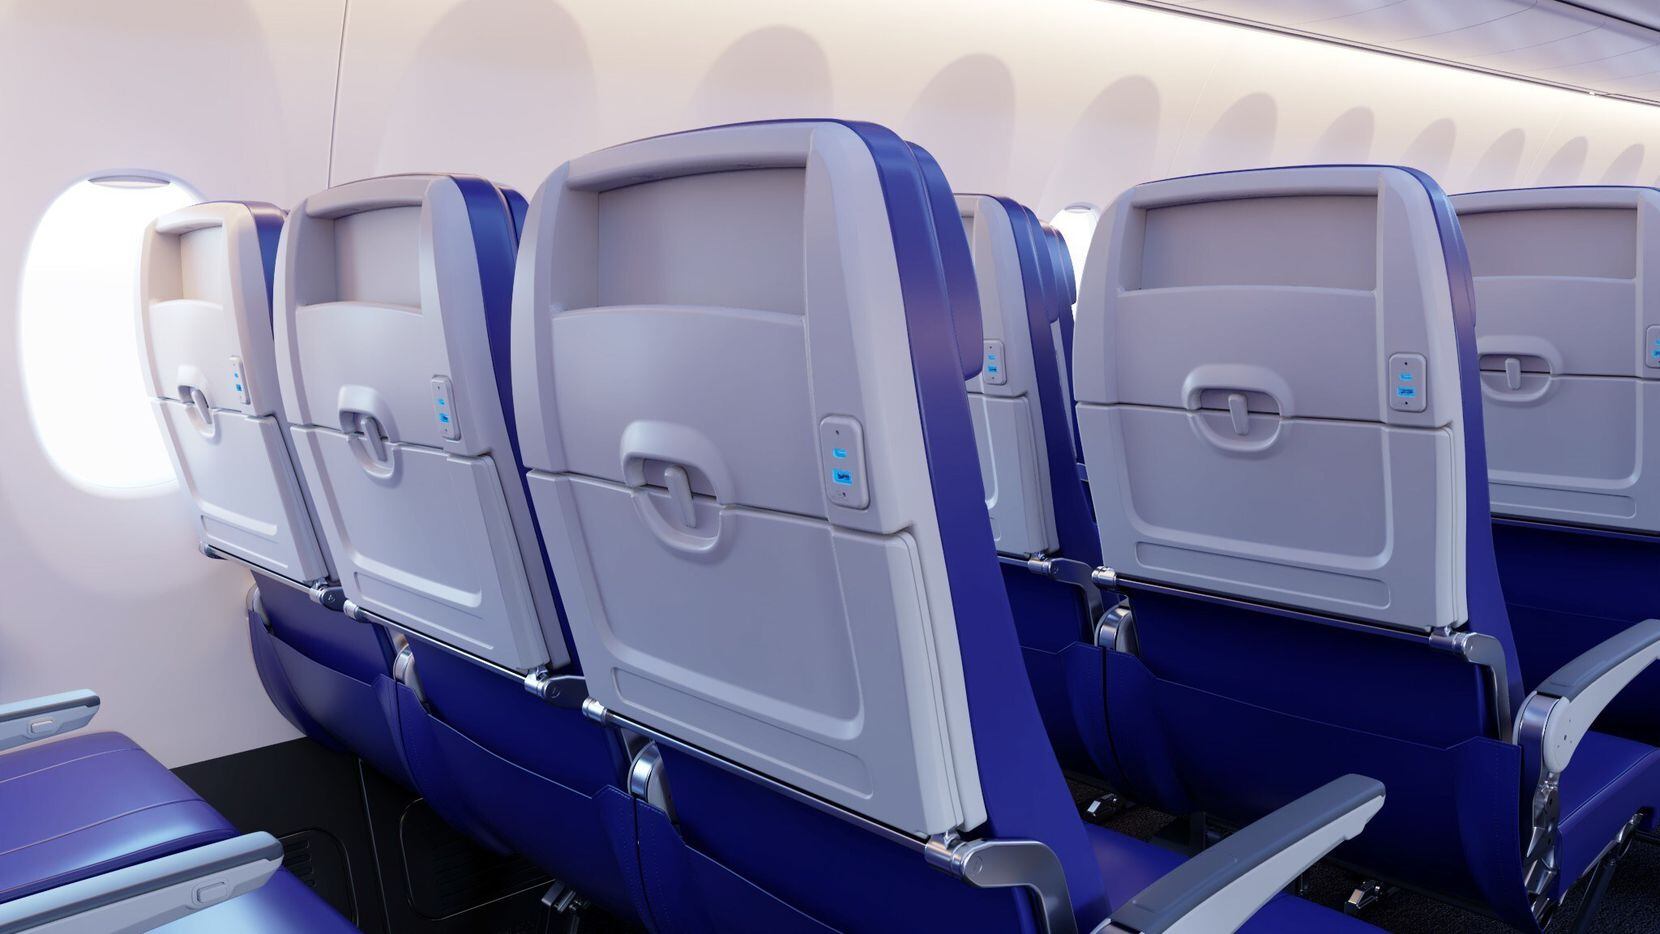 In-seat USB plugs coming to Southwest Airlines starting early next year with deliveries of...